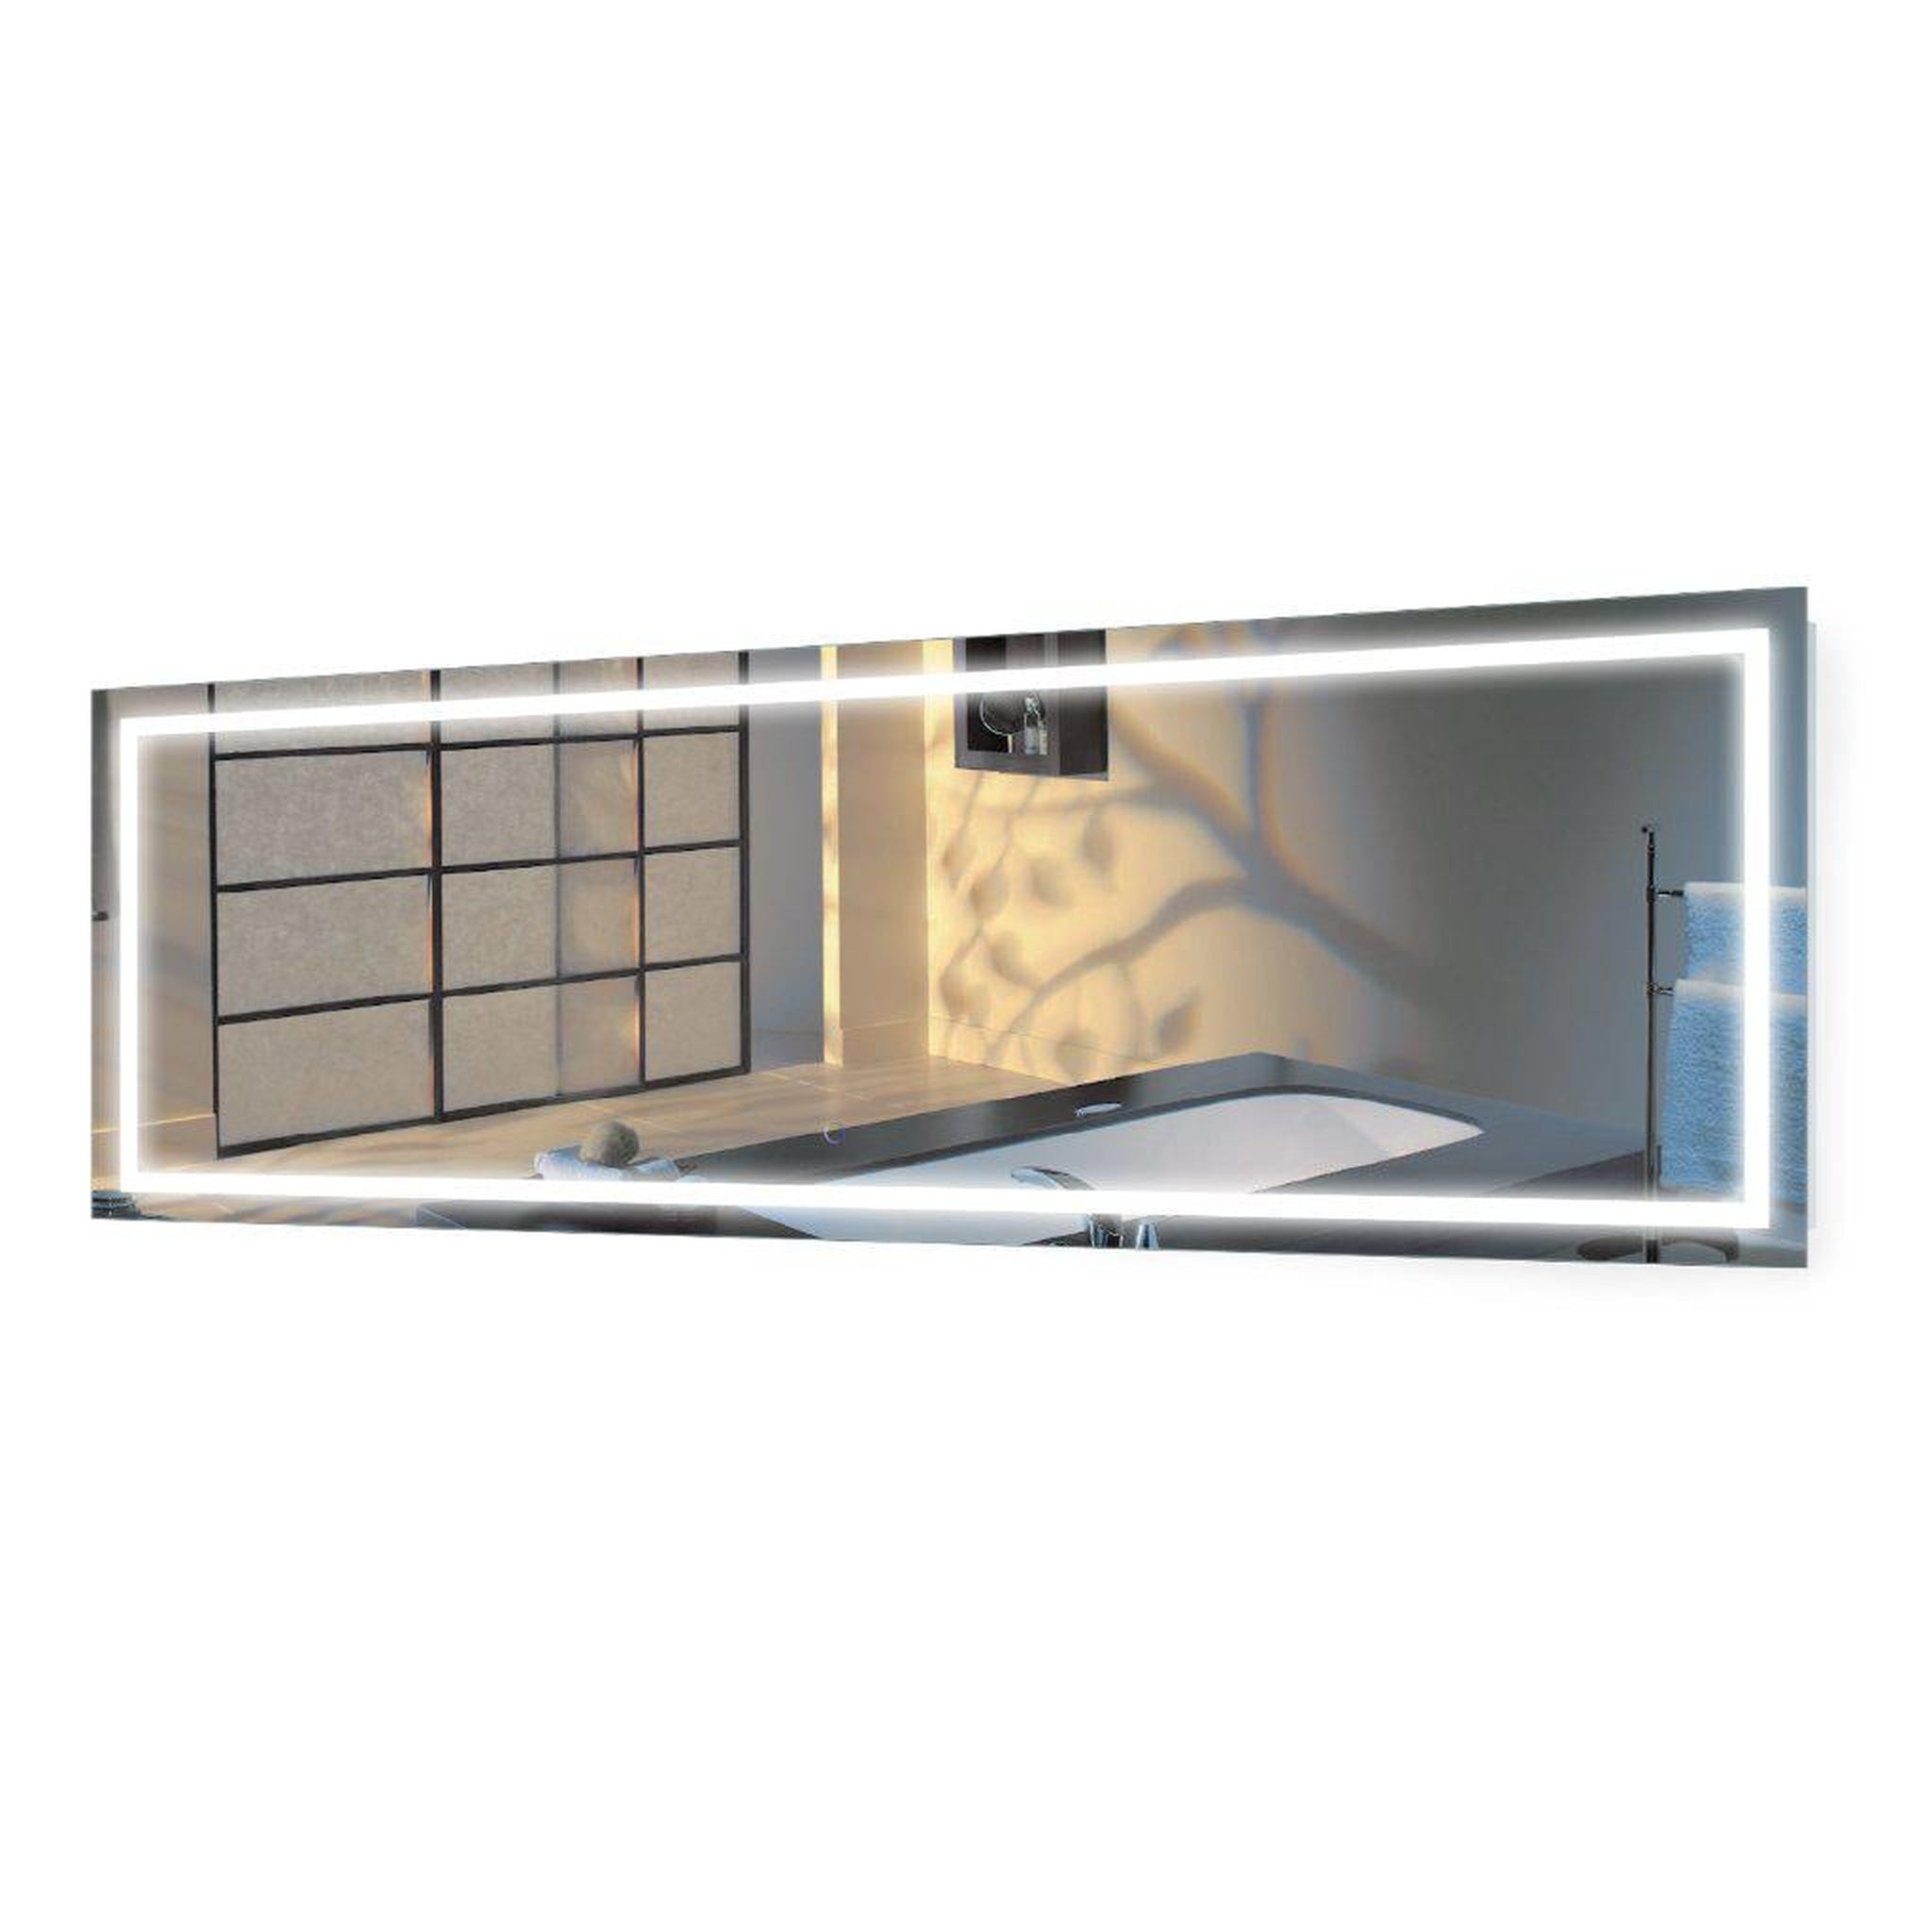 Krugg Reflections, Krugg Reflections Icon 84" x 30" 5000K Rectangular Wall-Mounted Illuminated Silver Backed LED Mirror With Built-in Defogger and Touch Sensor On/Off Built-in Dimmer